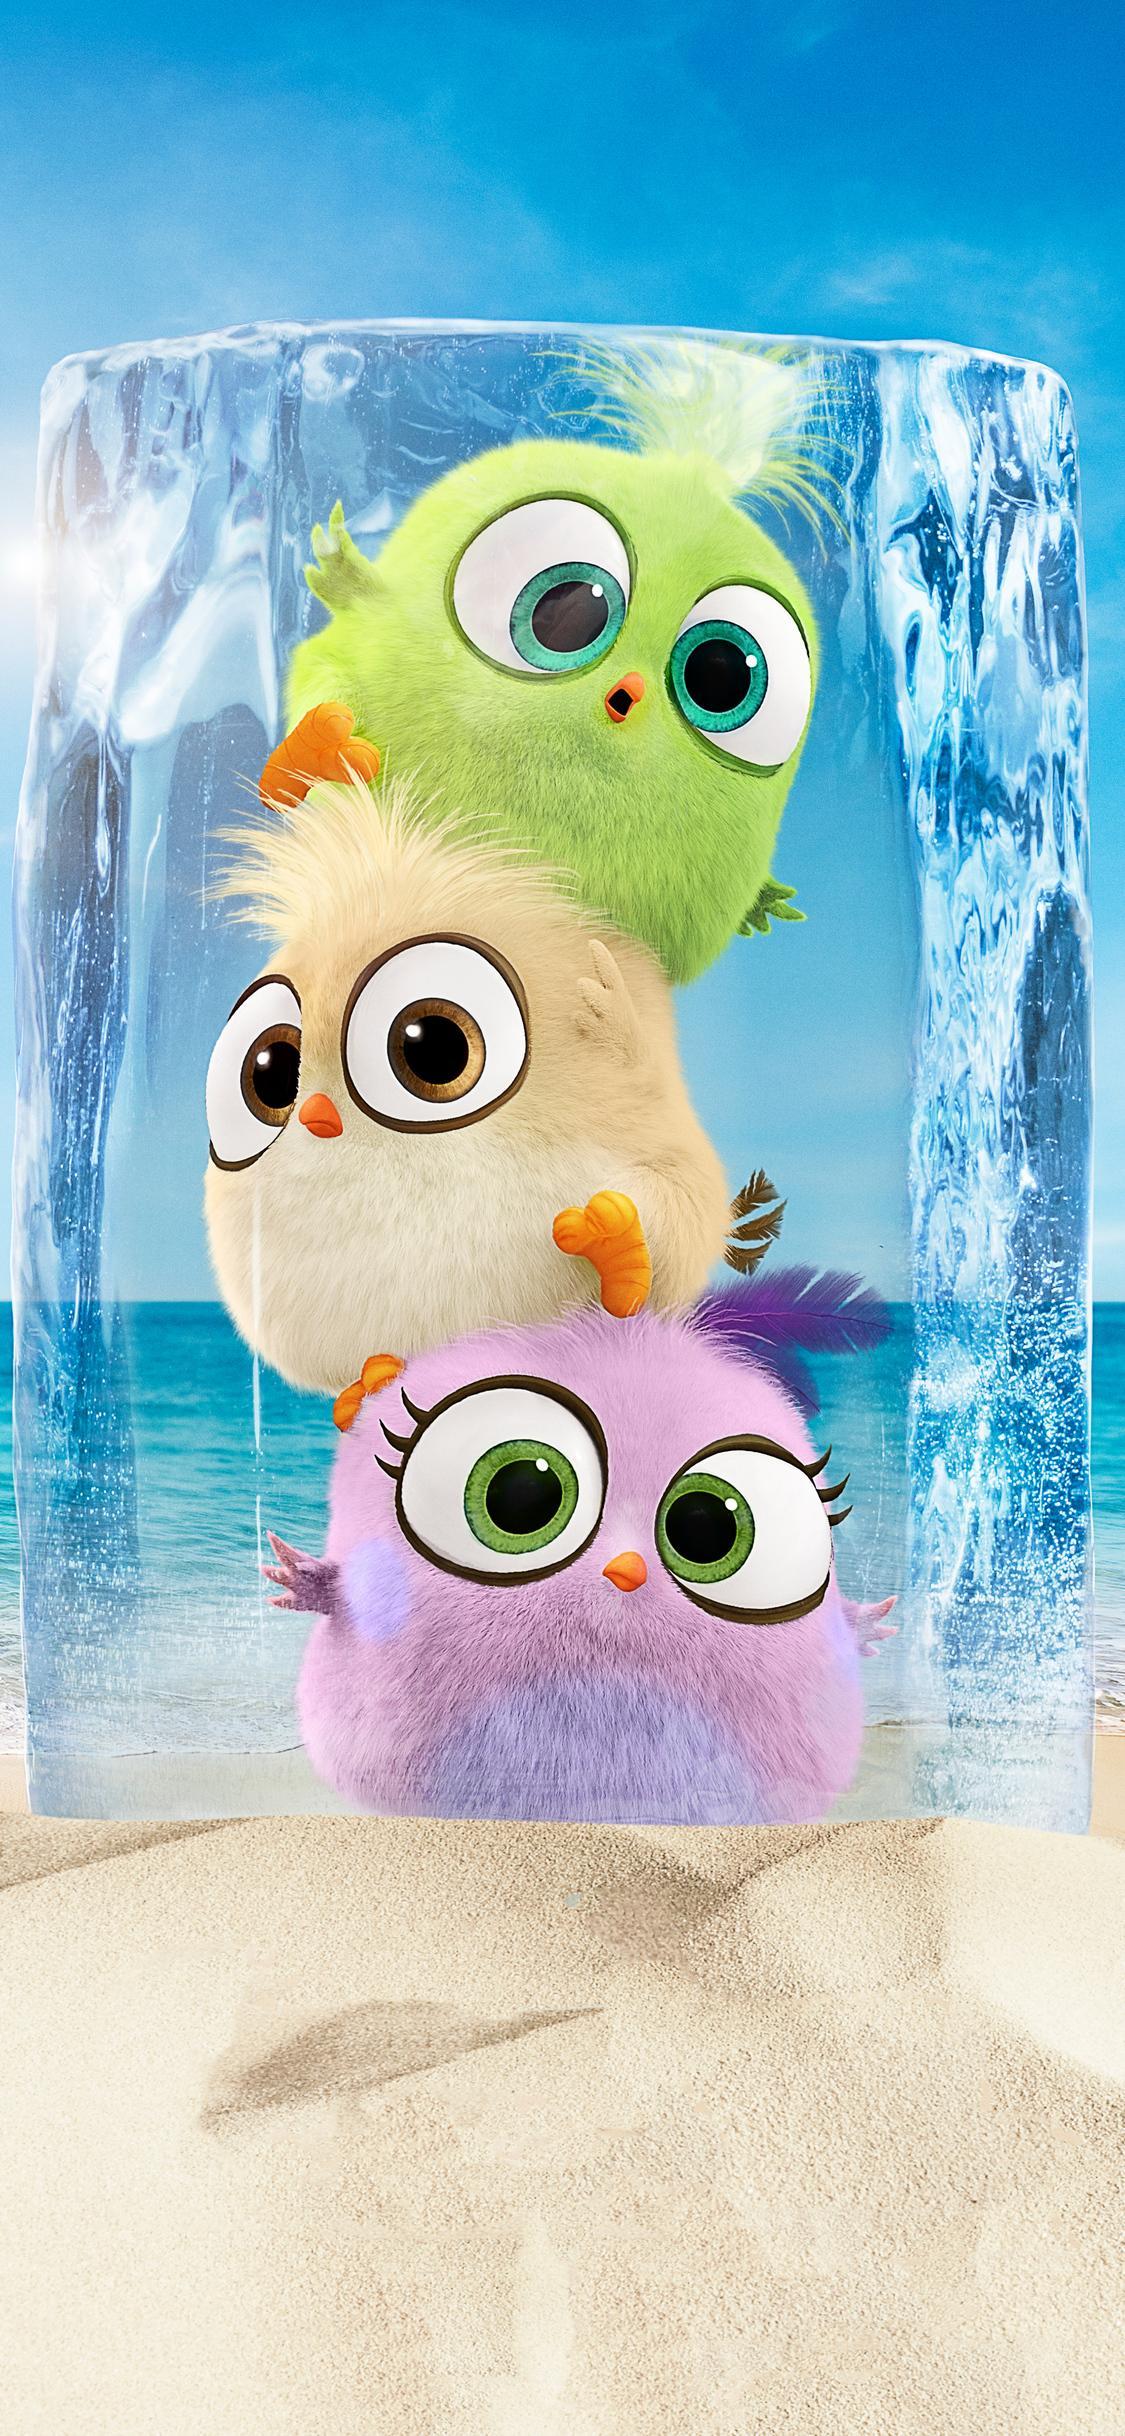 Hatchlings In The Angry Birds Movie 2 iPhone XS, iPhone 10